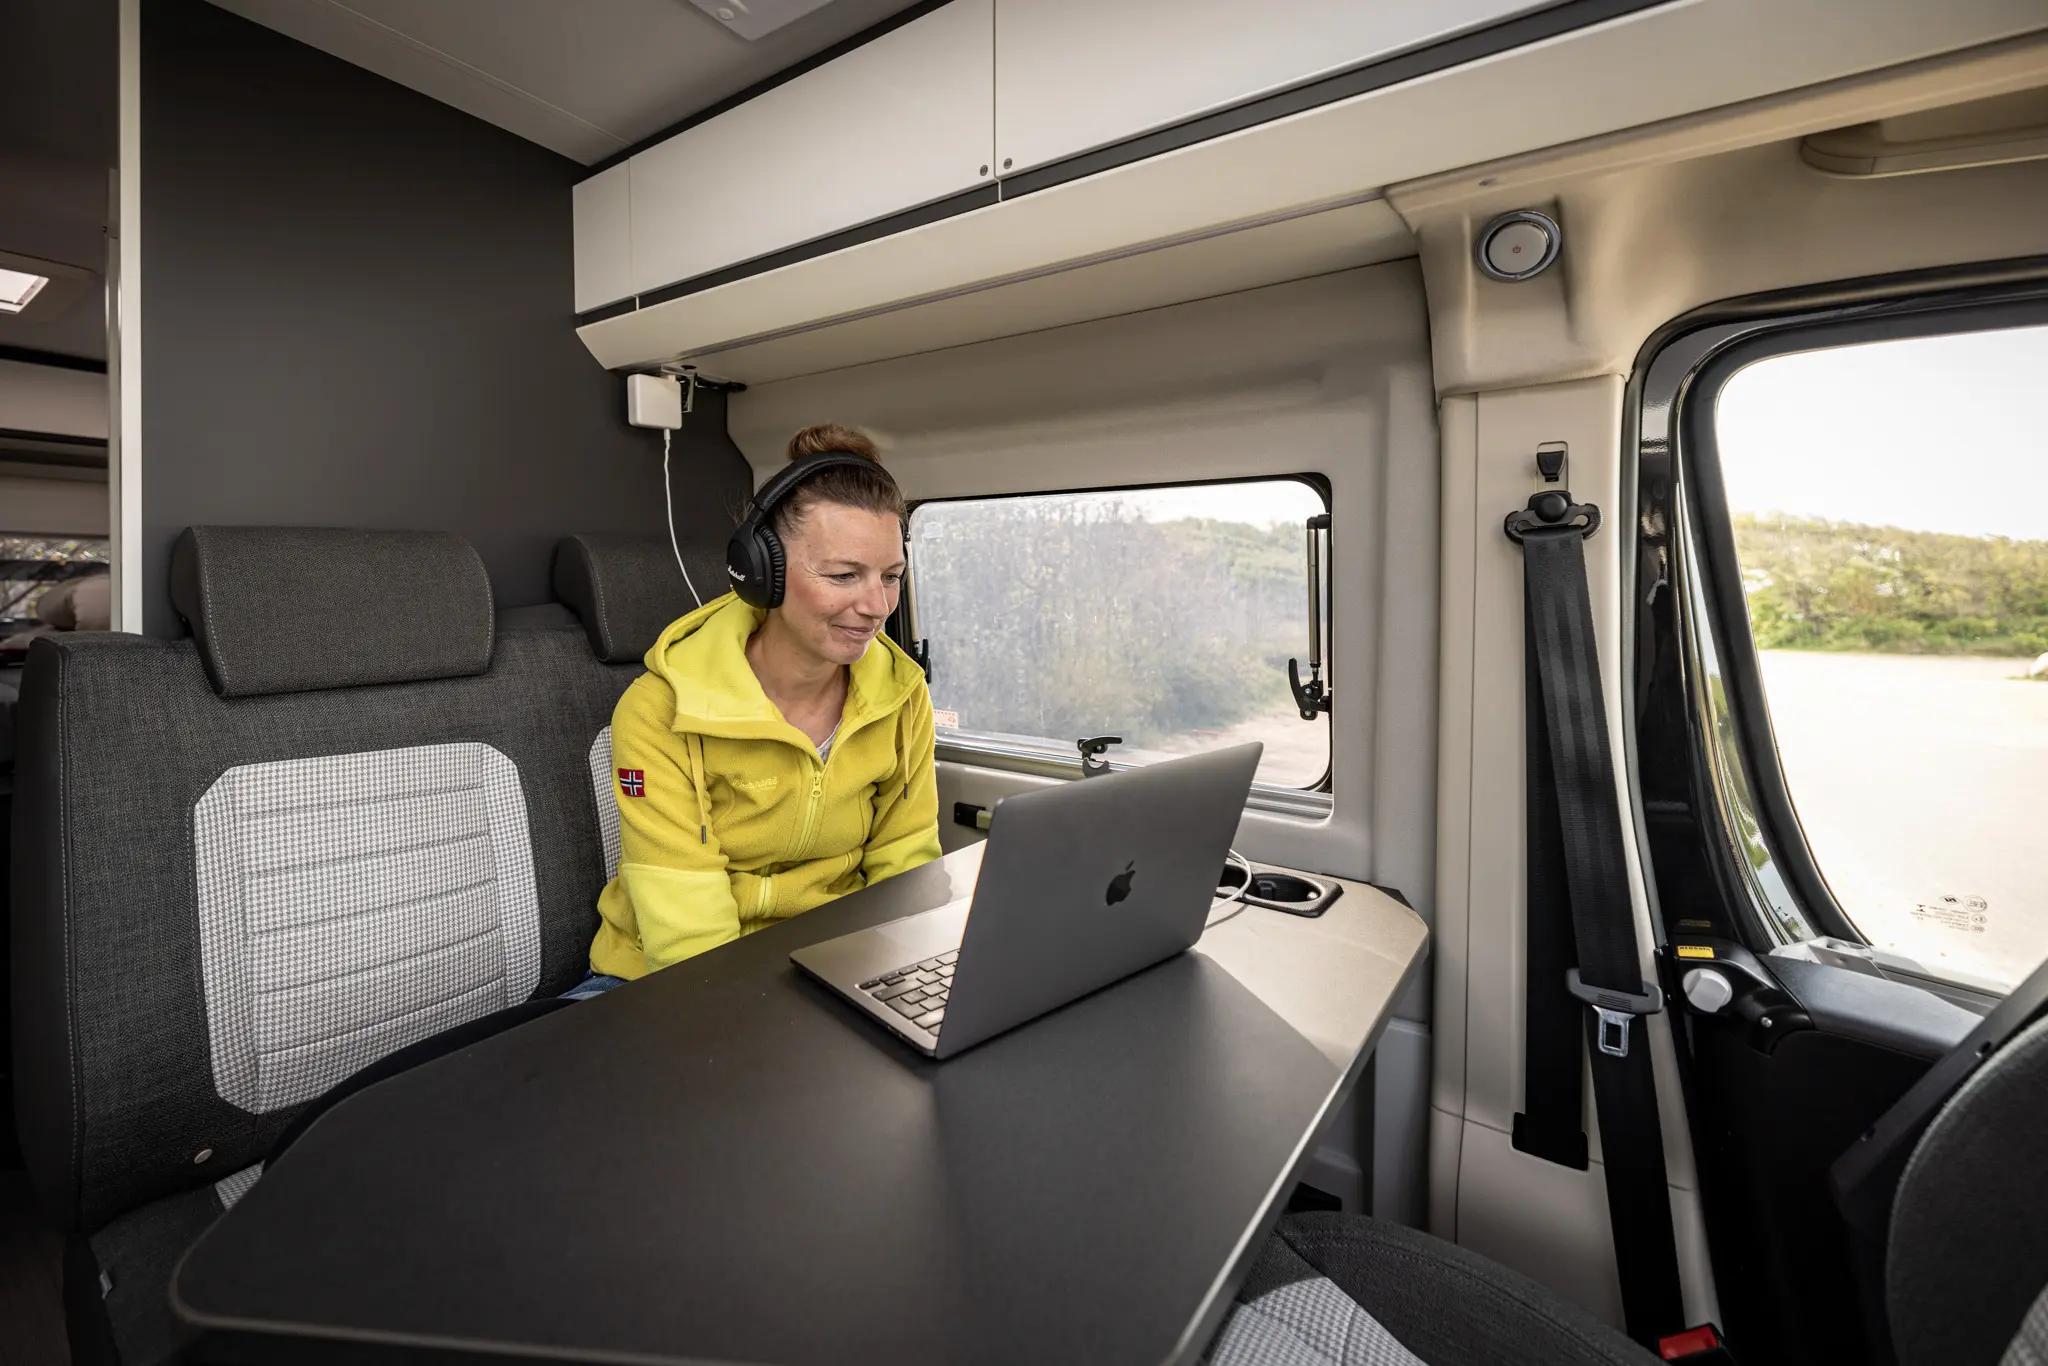 Work and Van Life: how do you do it with mobile internet?